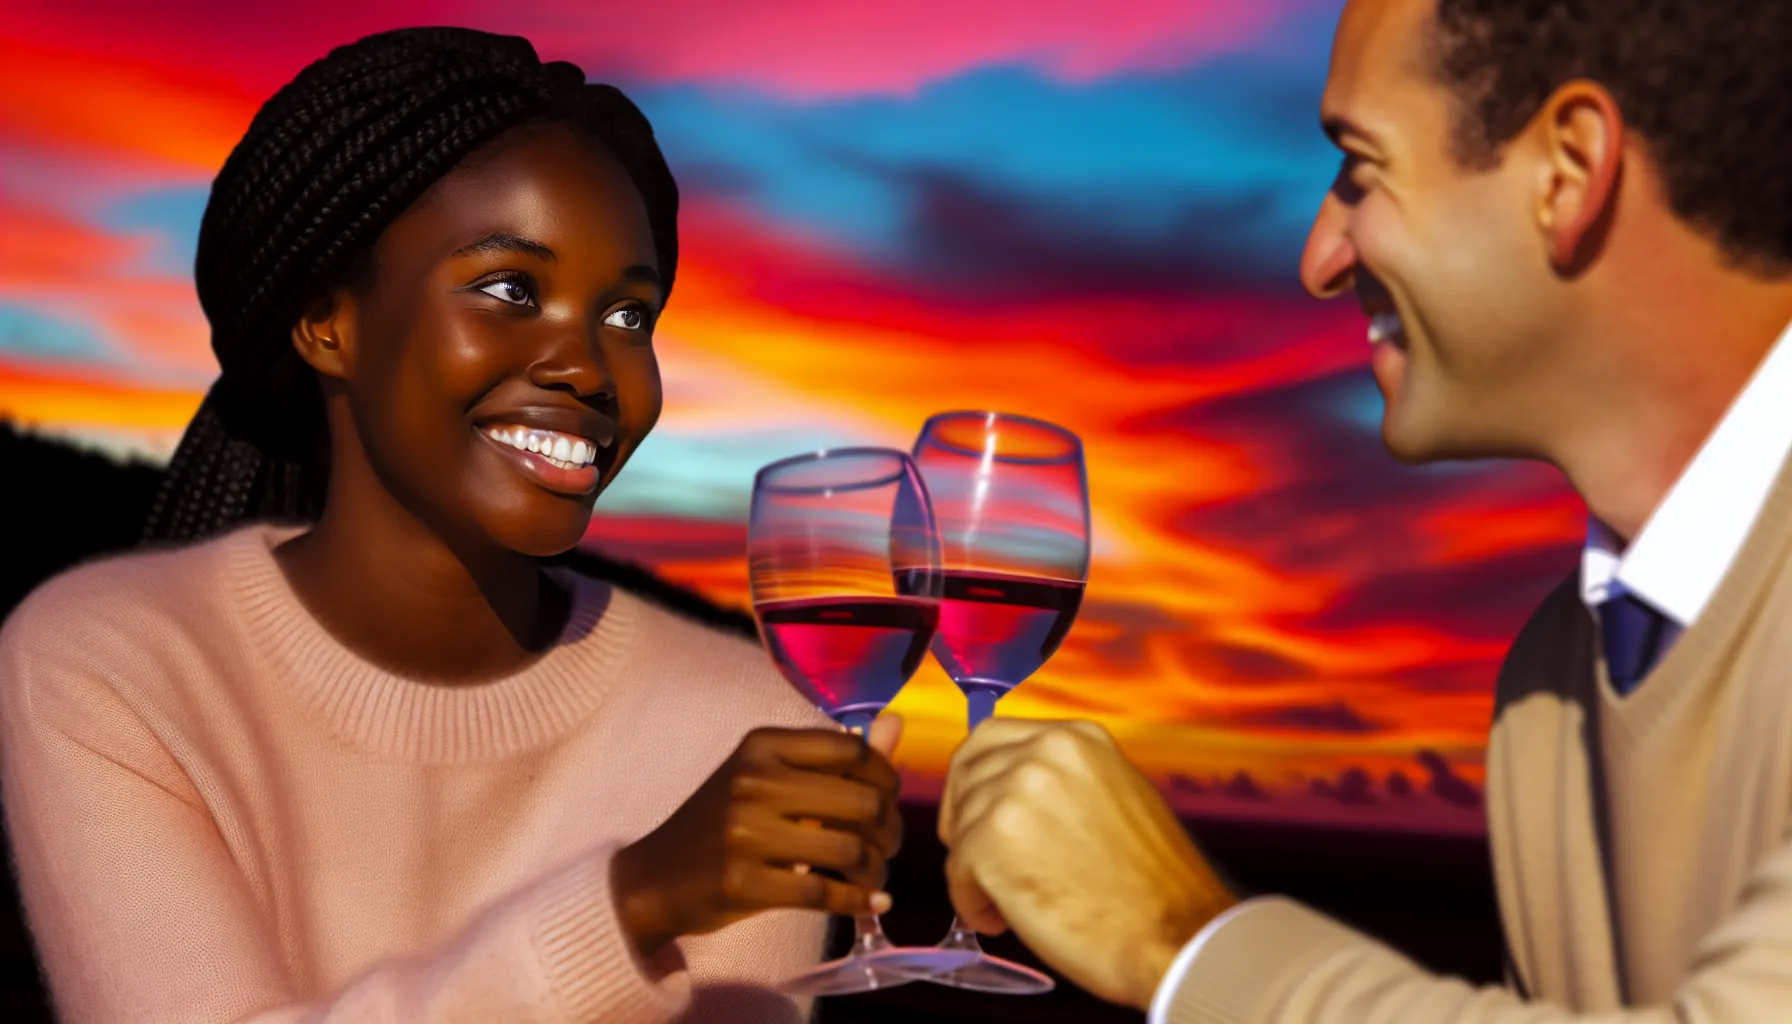 Couple celebrating with wine glasses against a sunset